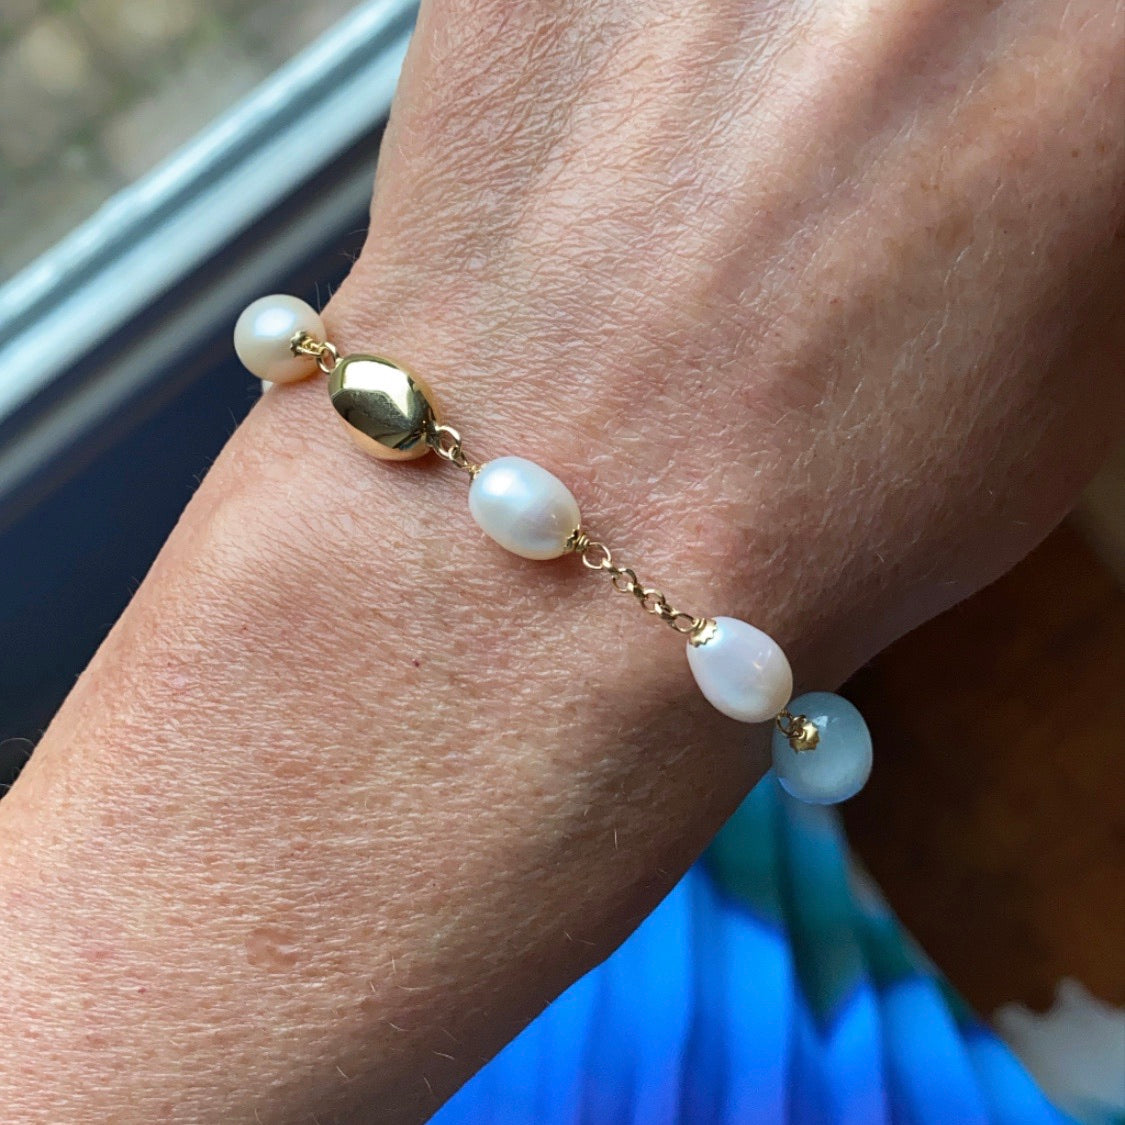 18ct Gold Silky Aquamarine and Cultured Freshwater Pearl Chain Bracelet Pearl dimensions: 10mm x 8mm approximately Silky Aquamarine dimensions: 12mm x 10mm approximately 19cm long 18ct yellow gold This item can be ordered in a variety of lengths.  Please contact us for custom requirements.